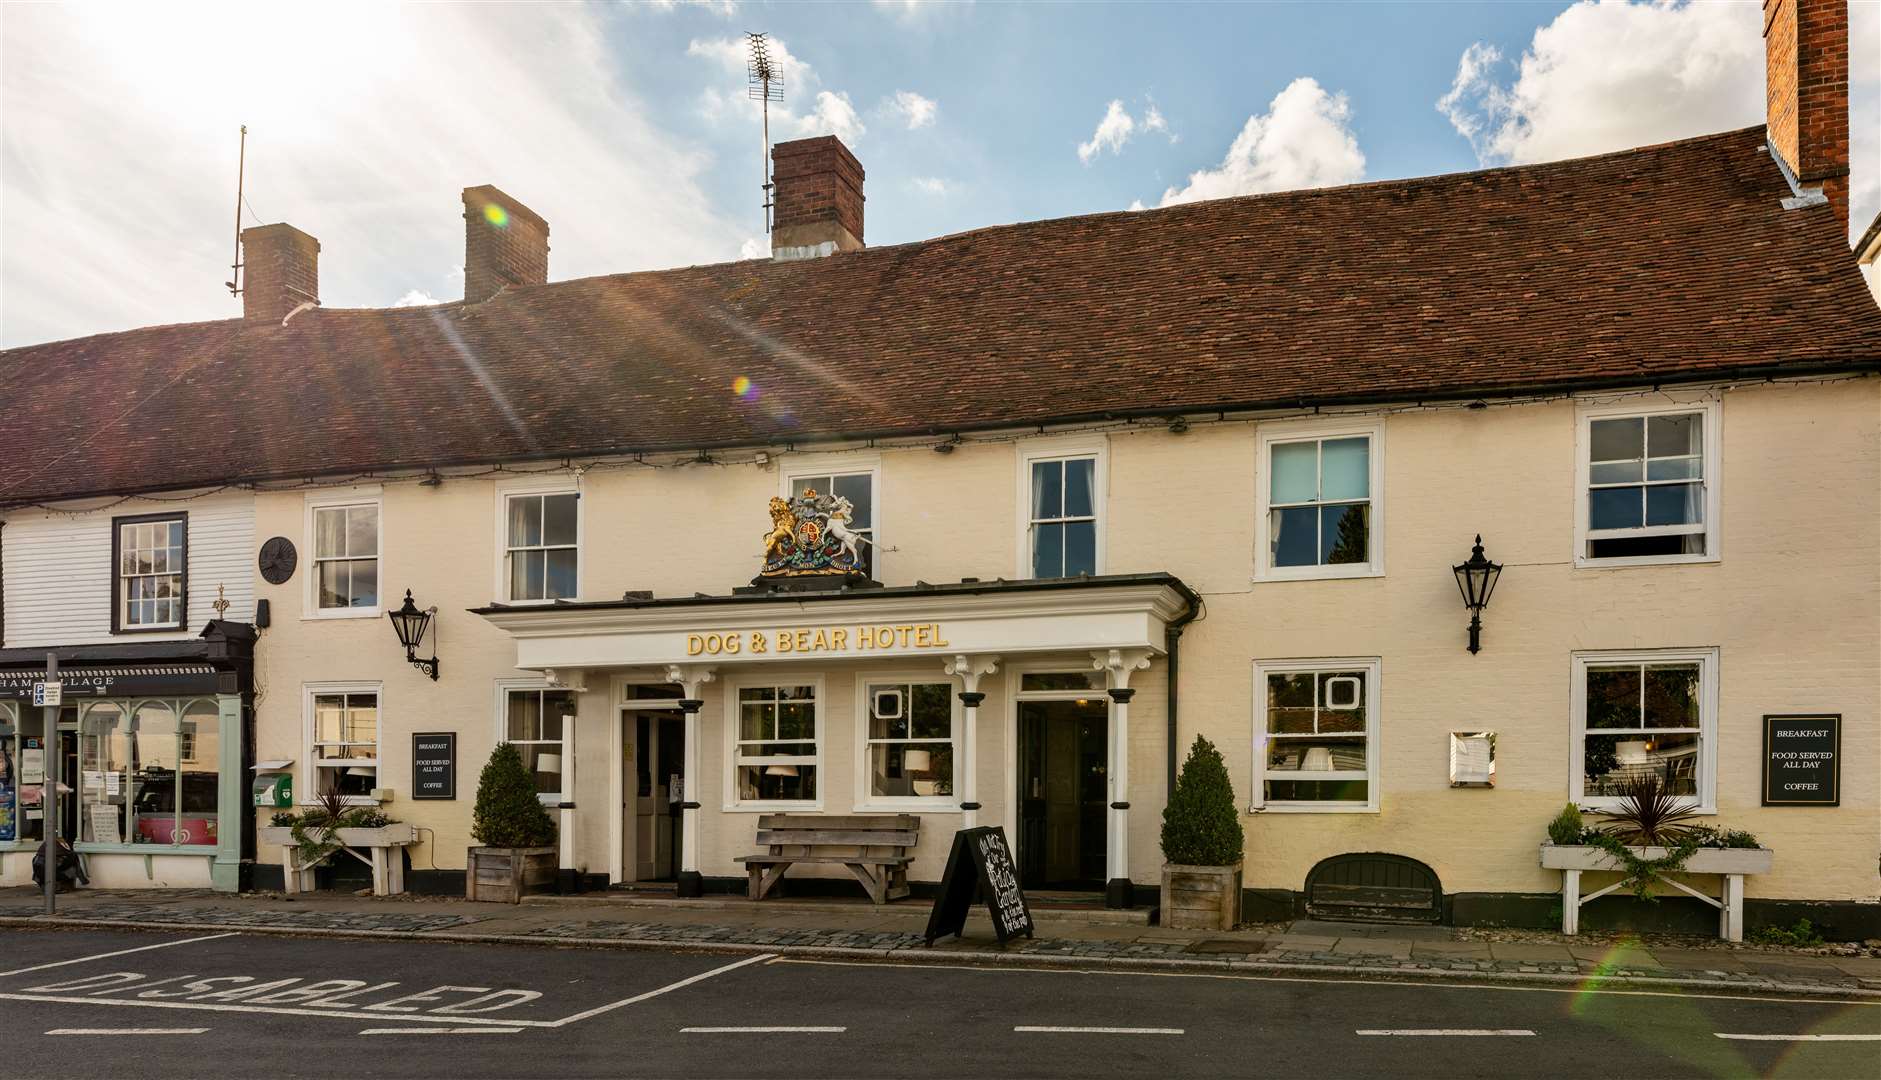 The Dog & Bear Hotel on Lenham Square can trace its roots back to 1602 and was visited by Queen Anne just over a century later in 1704